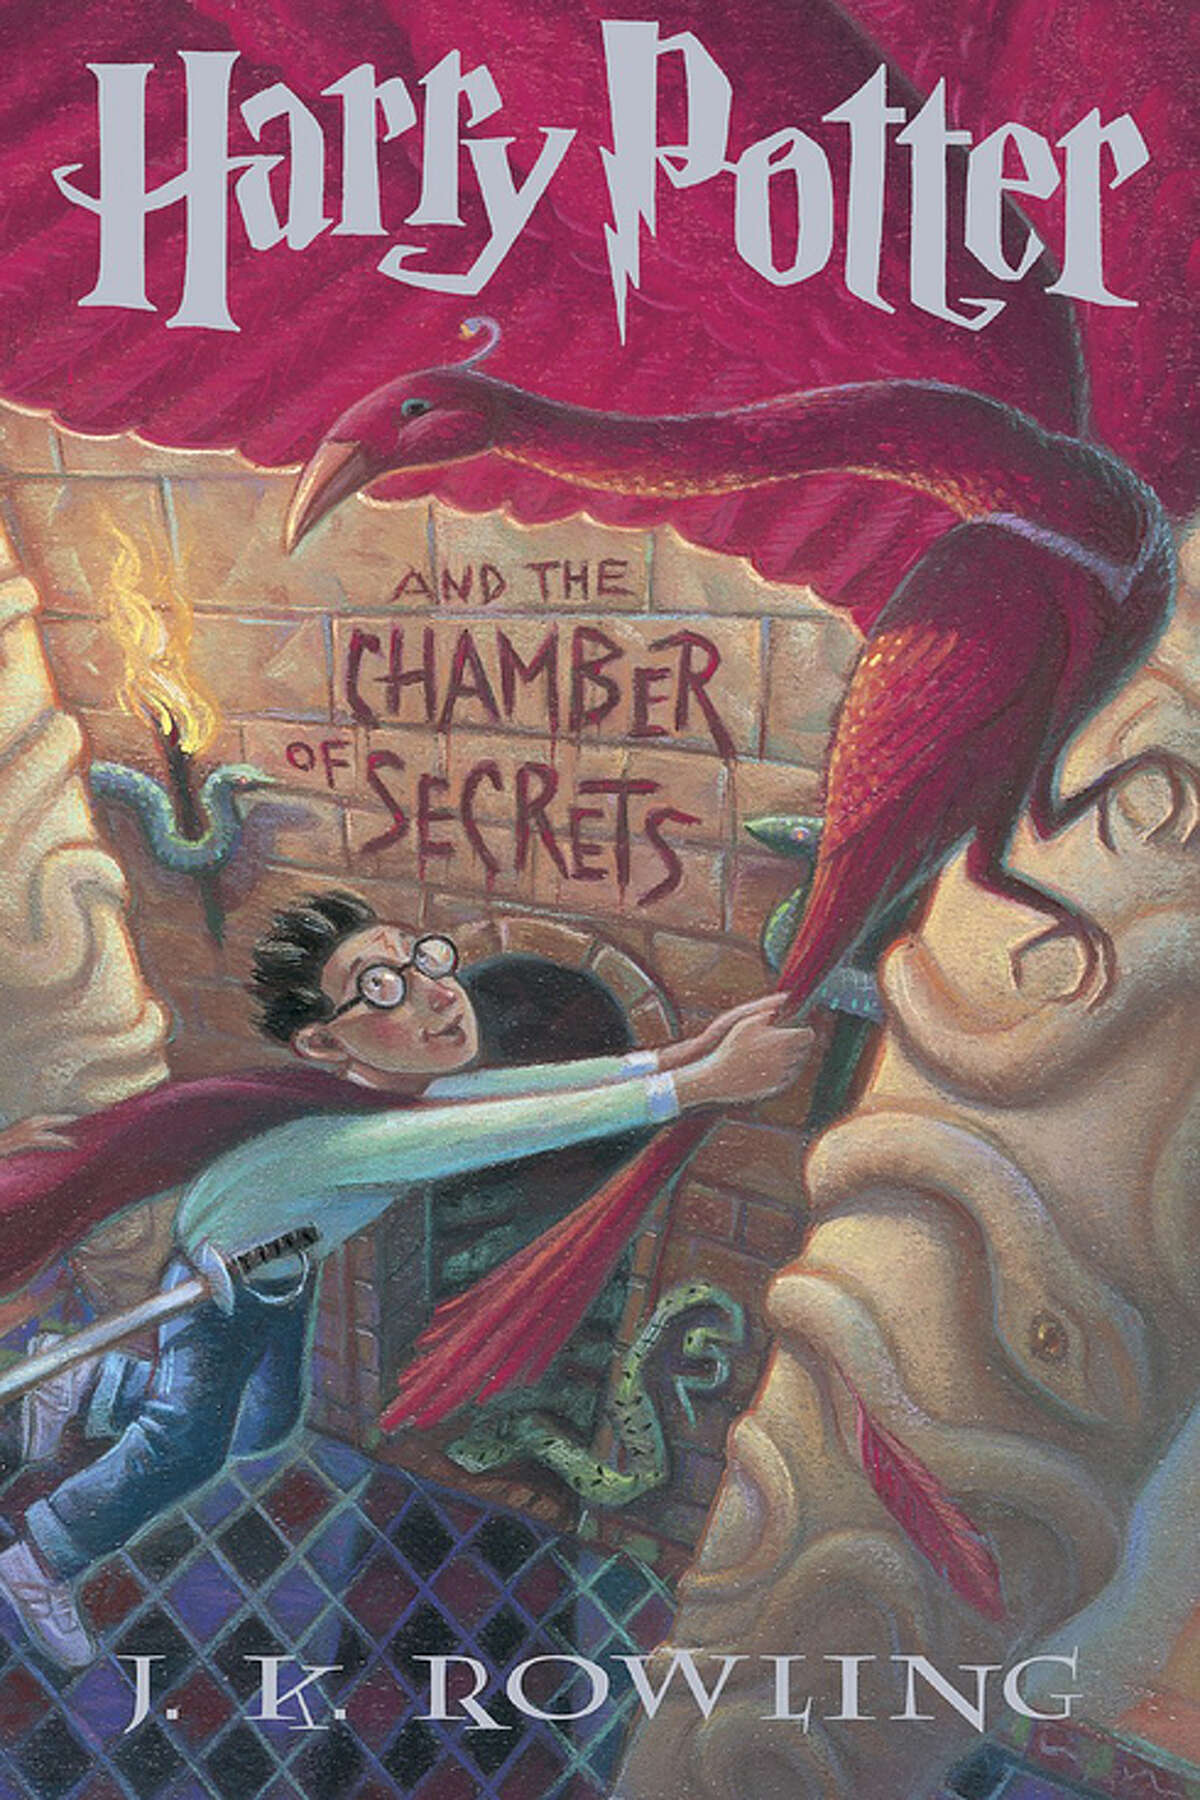 Harry Potter and the Chamber of Secrets (original)